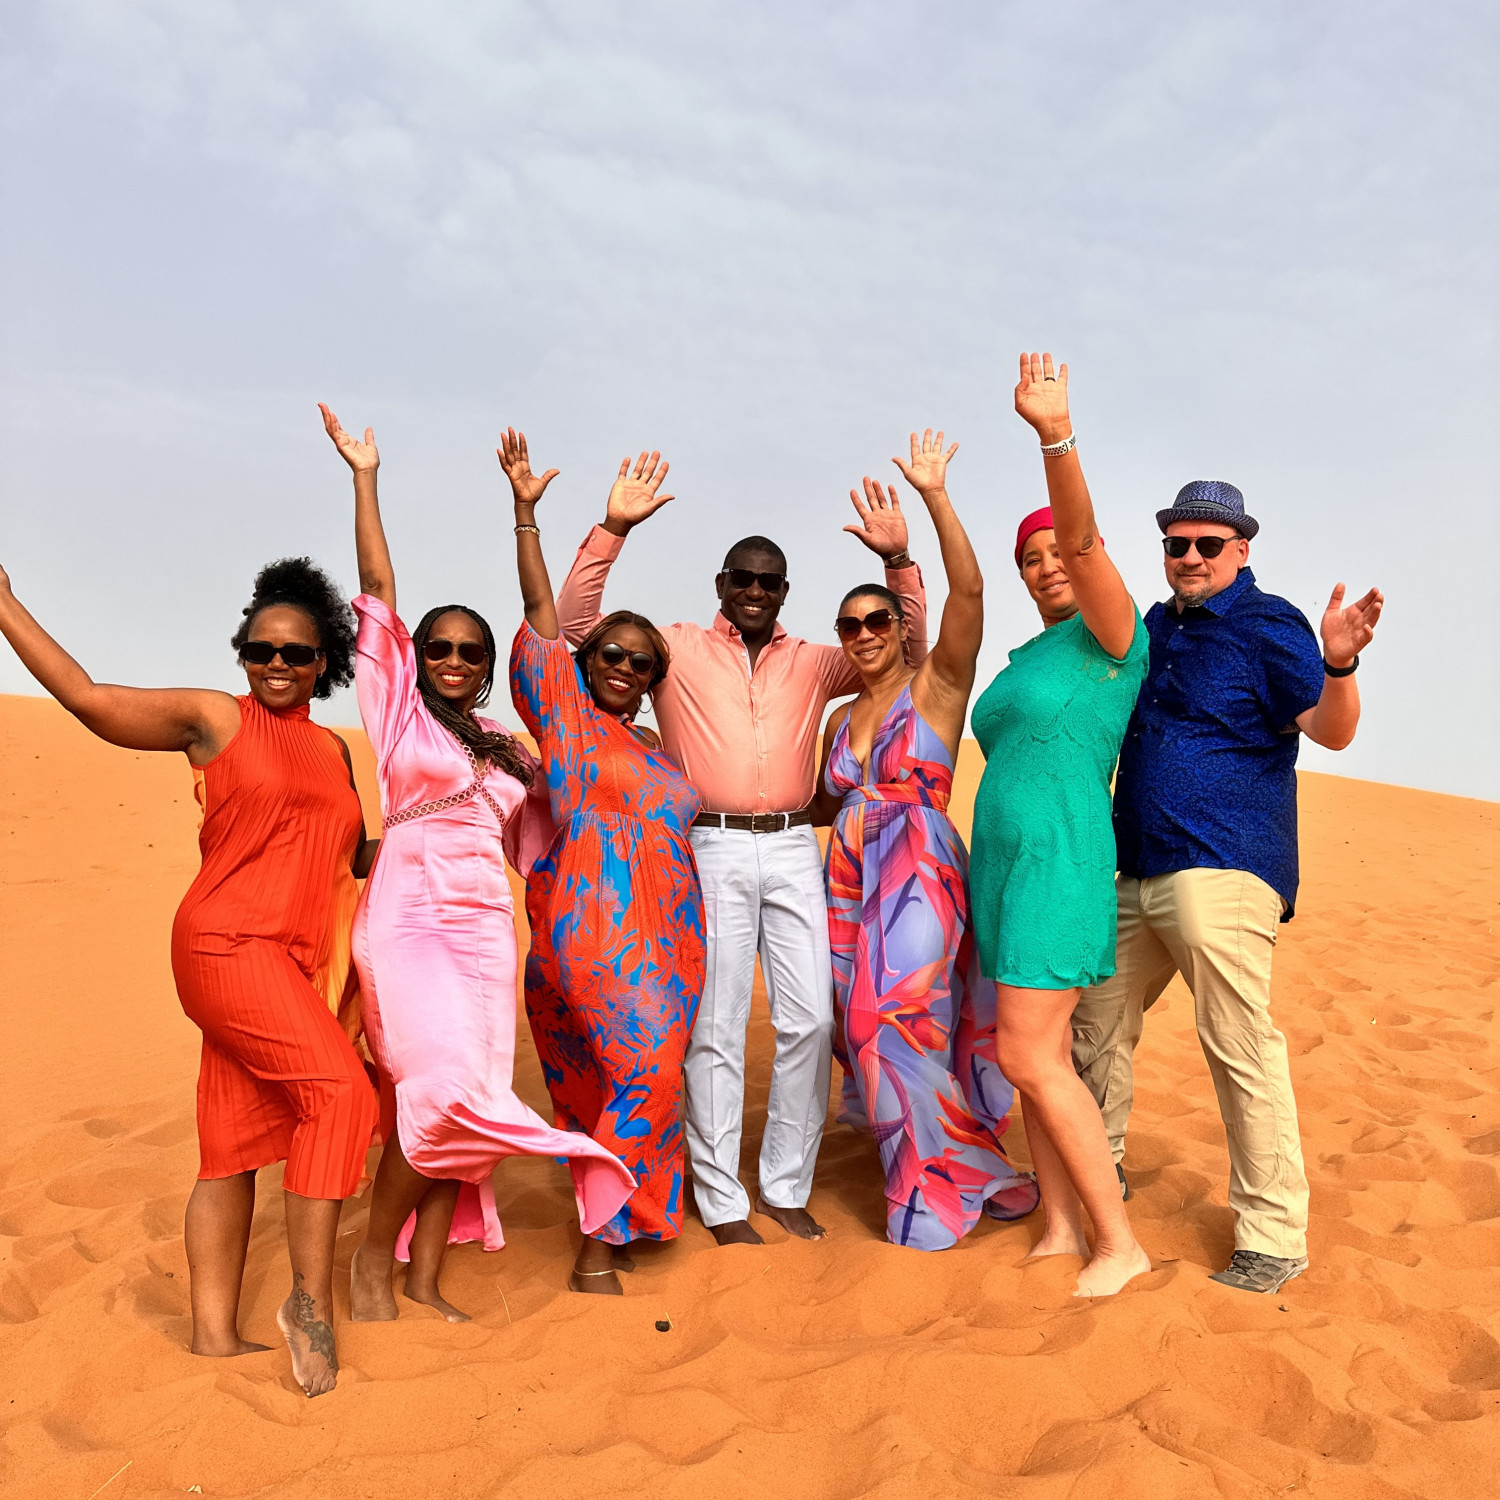 A group of people posing on sand